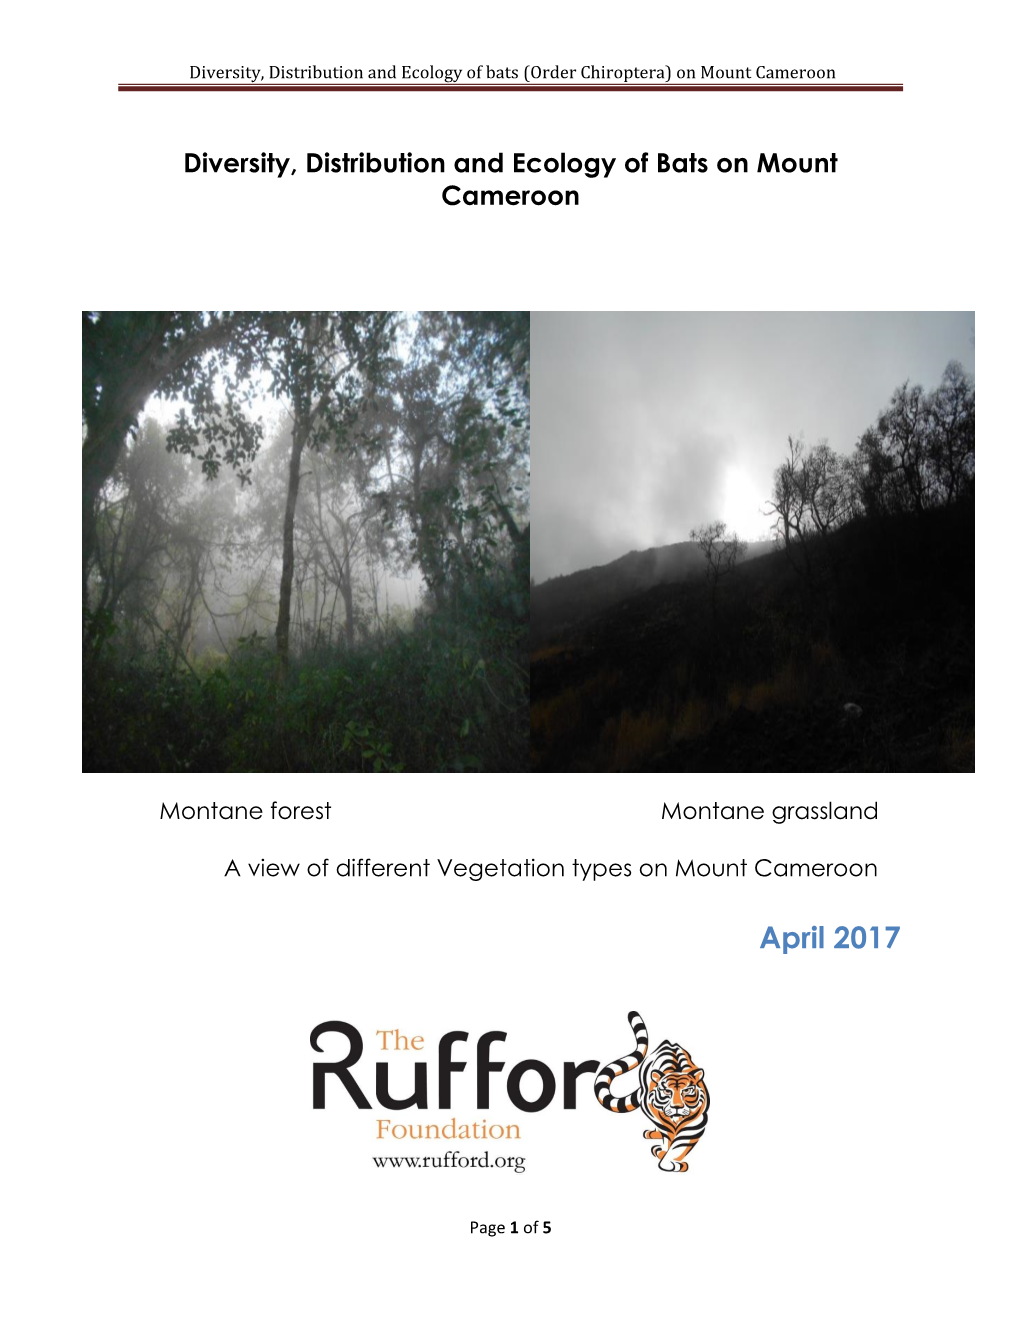 Diversity, Distribution and Ecology of Bats (Order Chiroptera) on Mount Cameroon